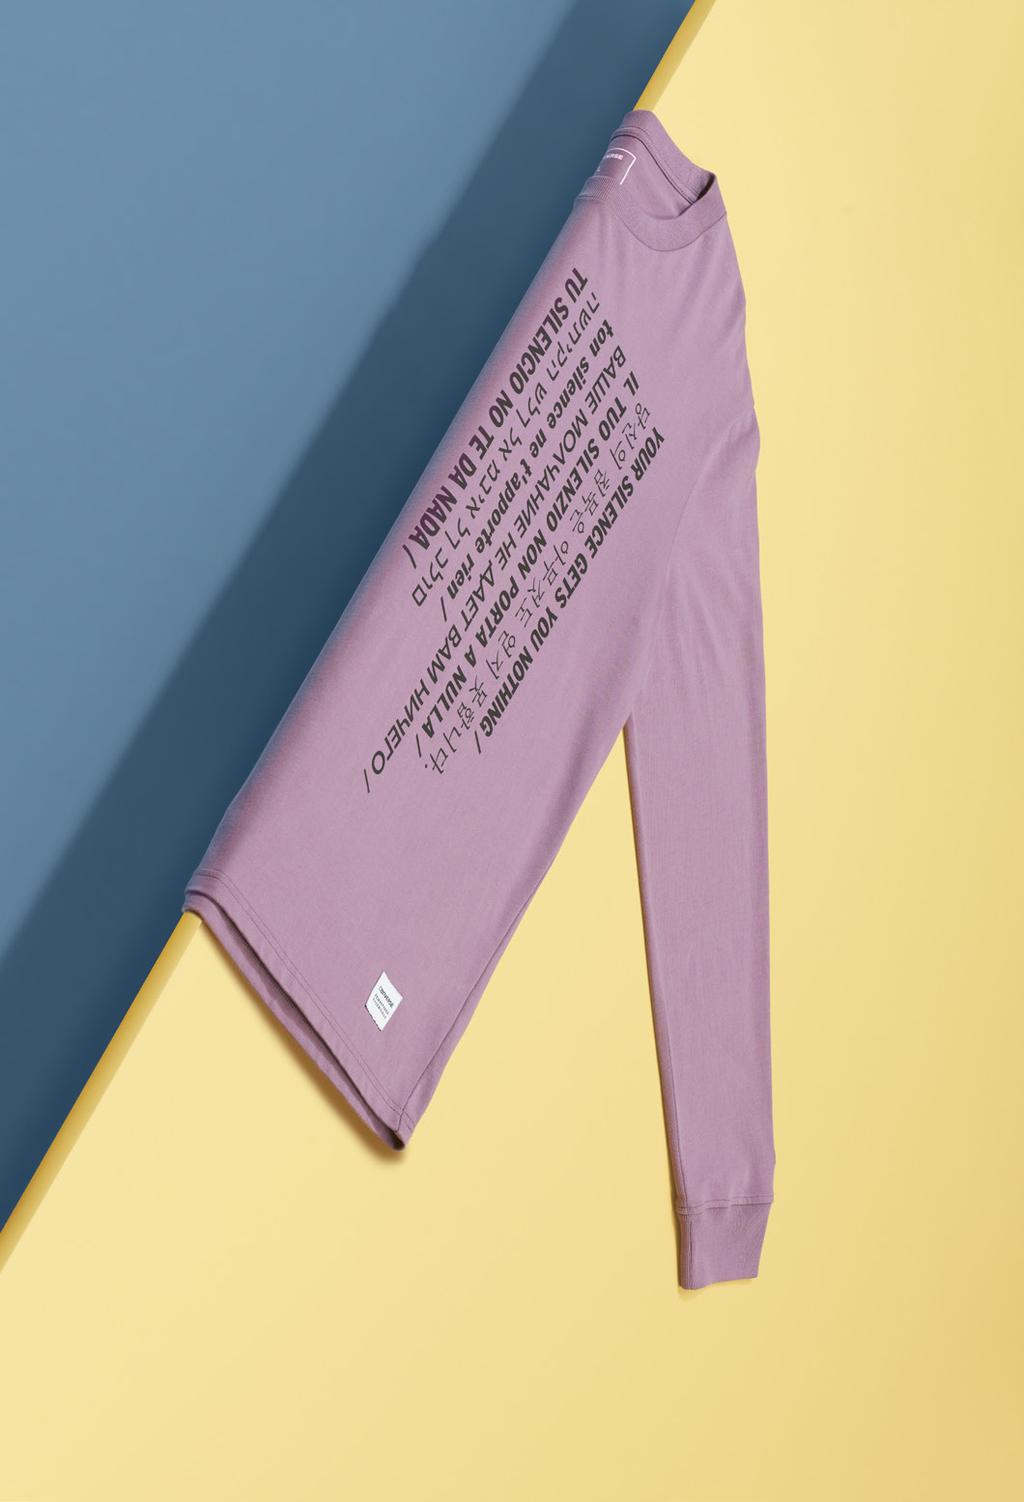 wearer to turn the shirt inside out and share the message through a different style point of view.